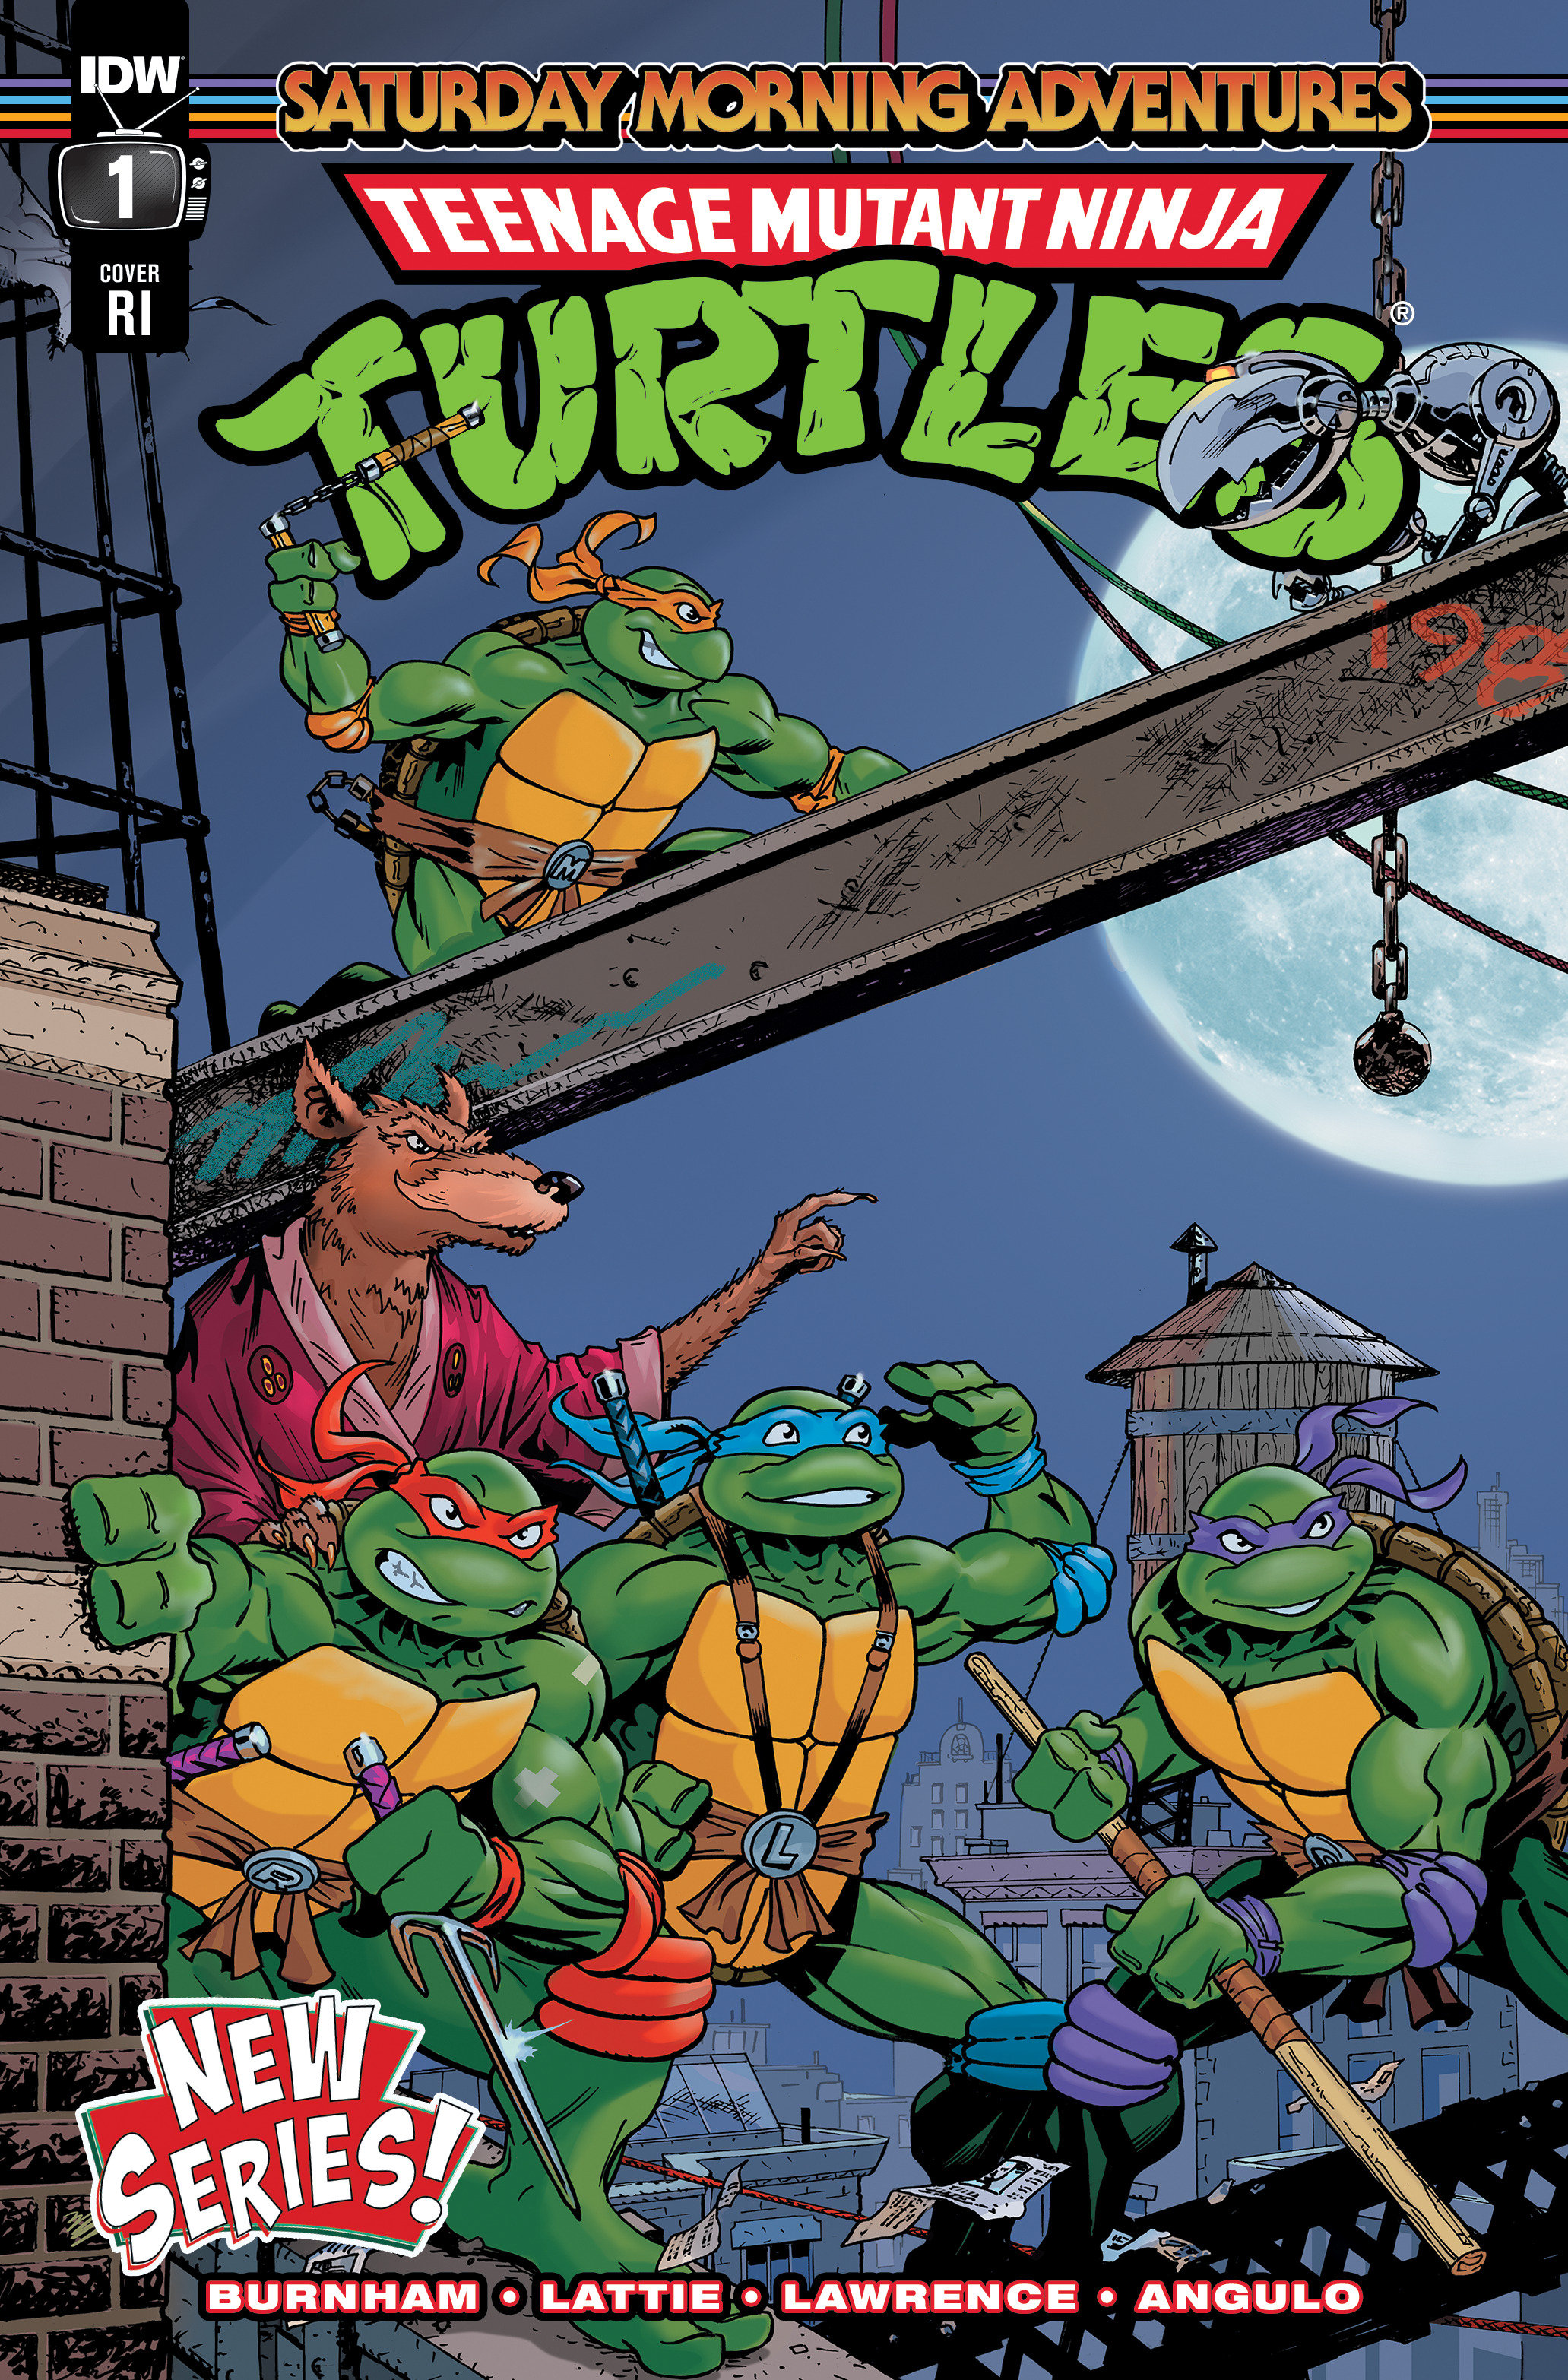 Teenage Mutant Ninja Turtles Saturday Morning Adventures Continued! #1 Cover D 1 for 10 Incentive